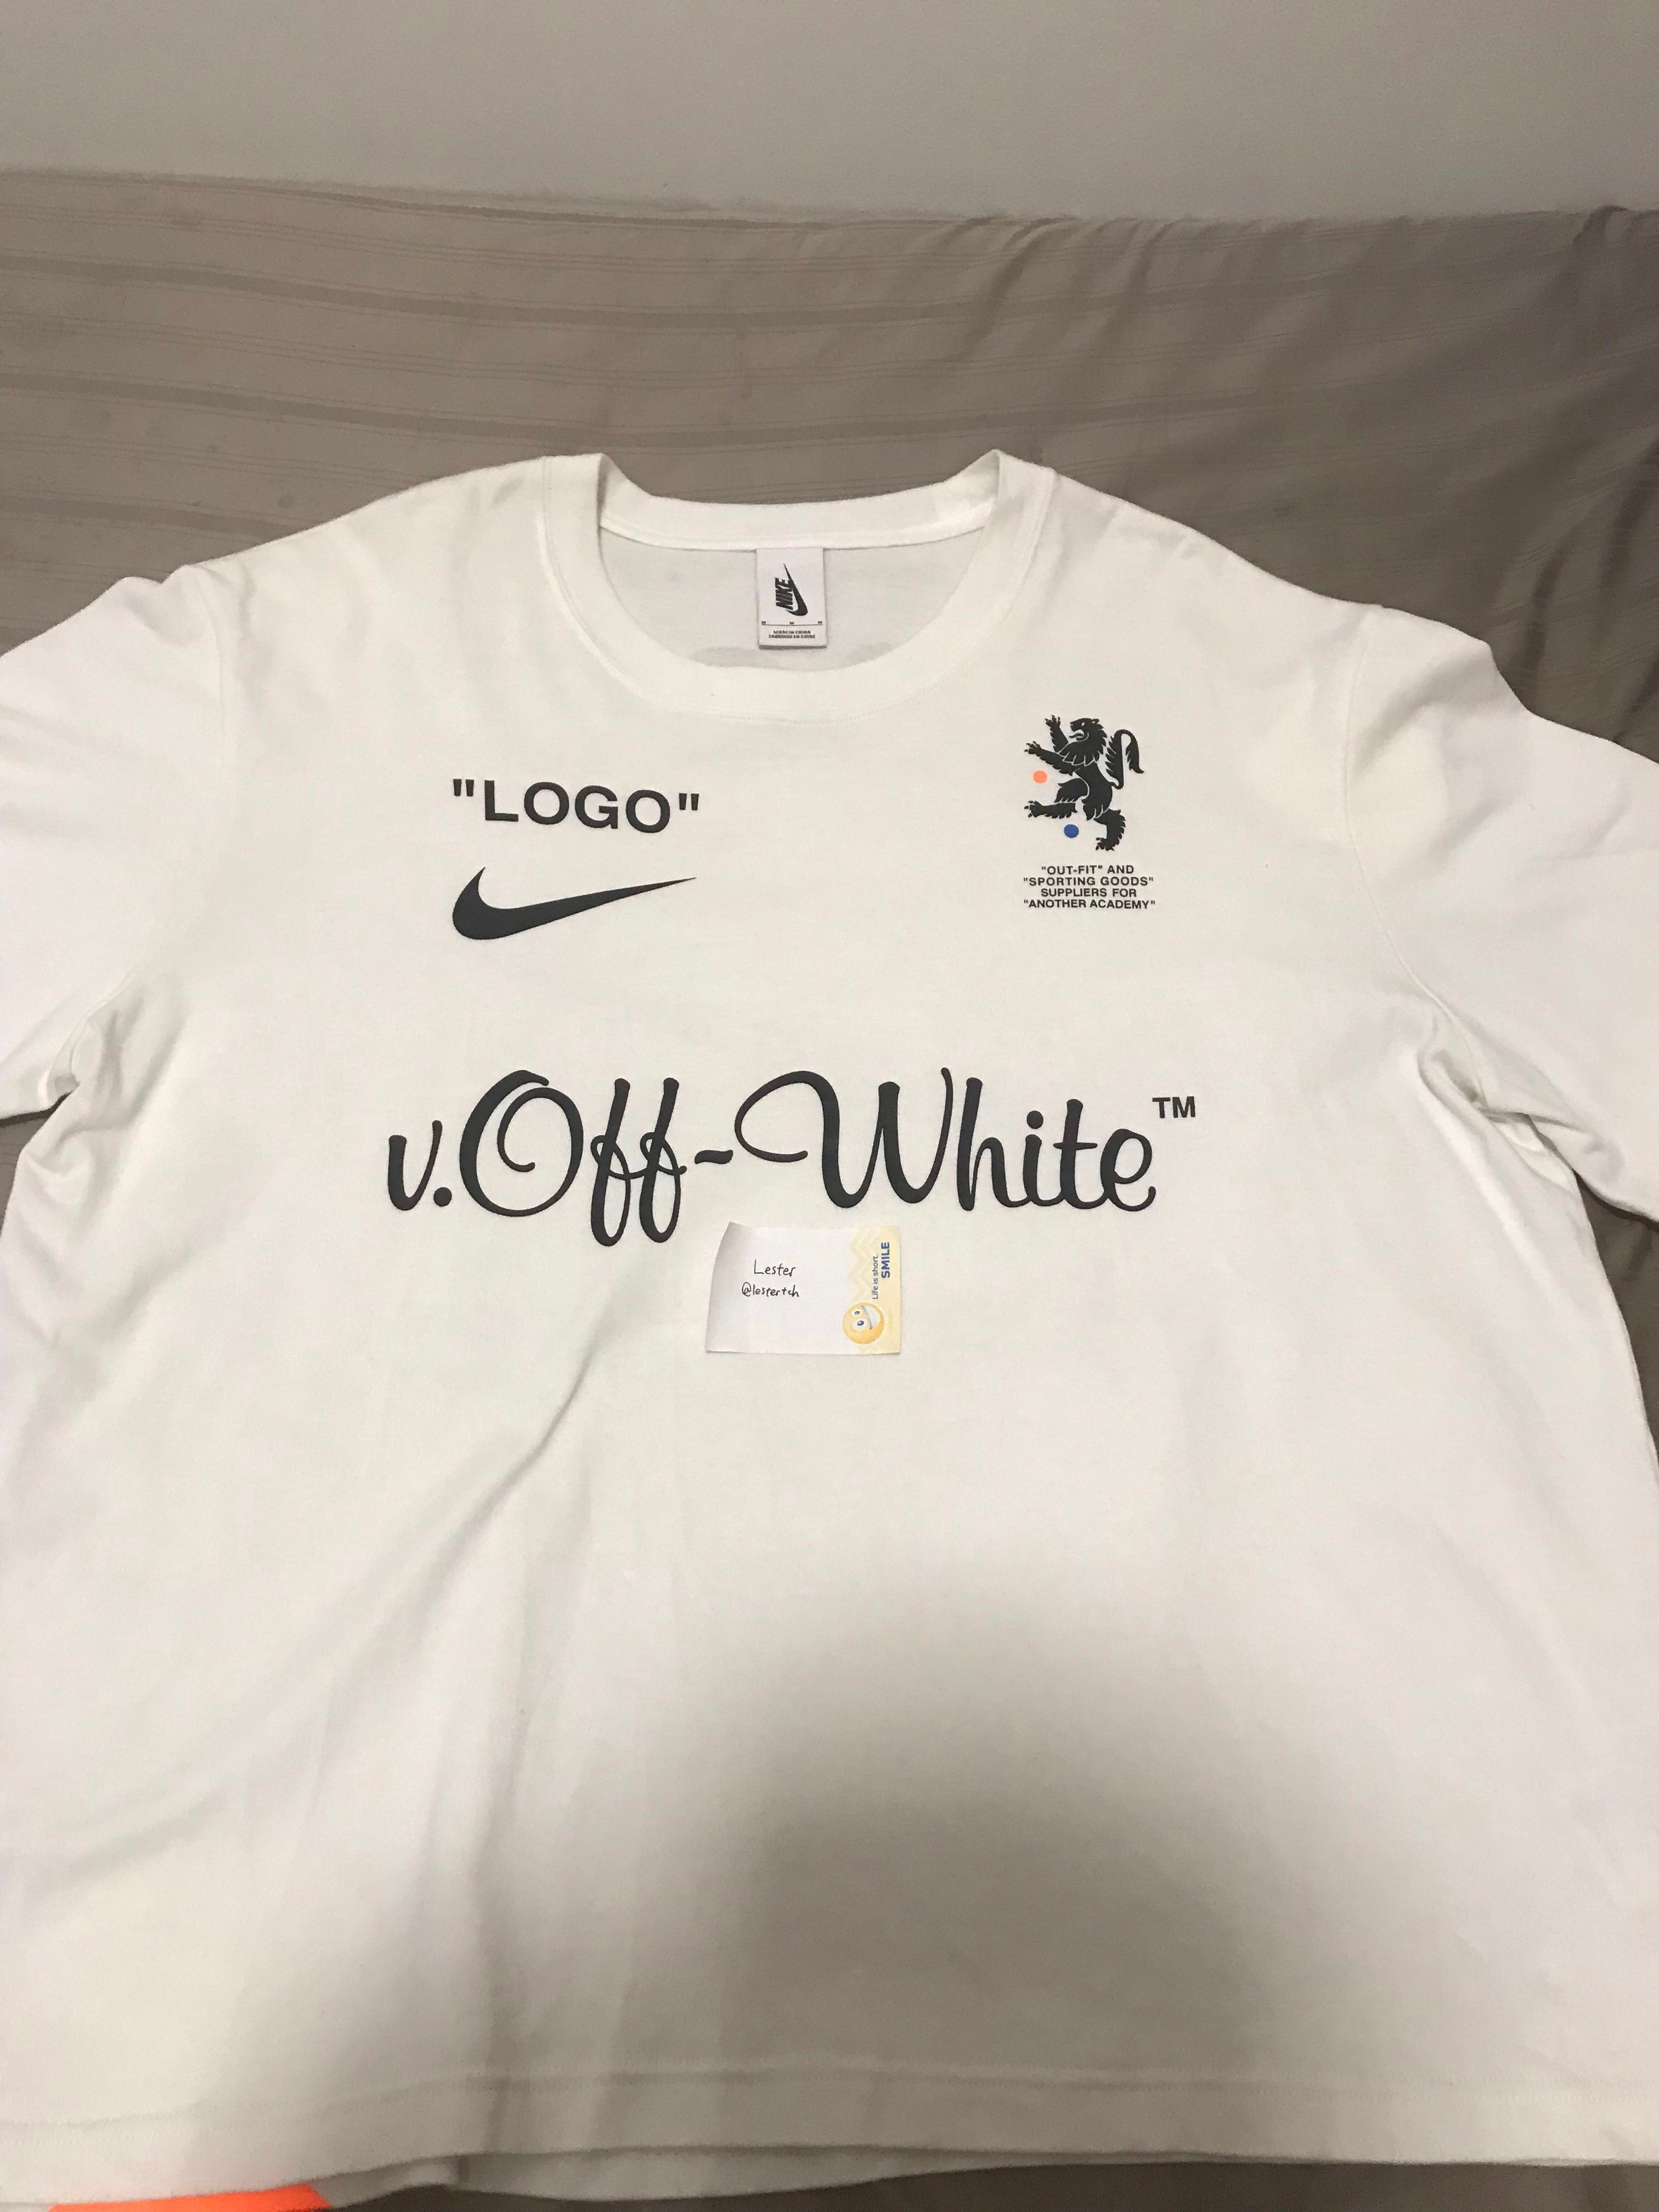 off white world cup